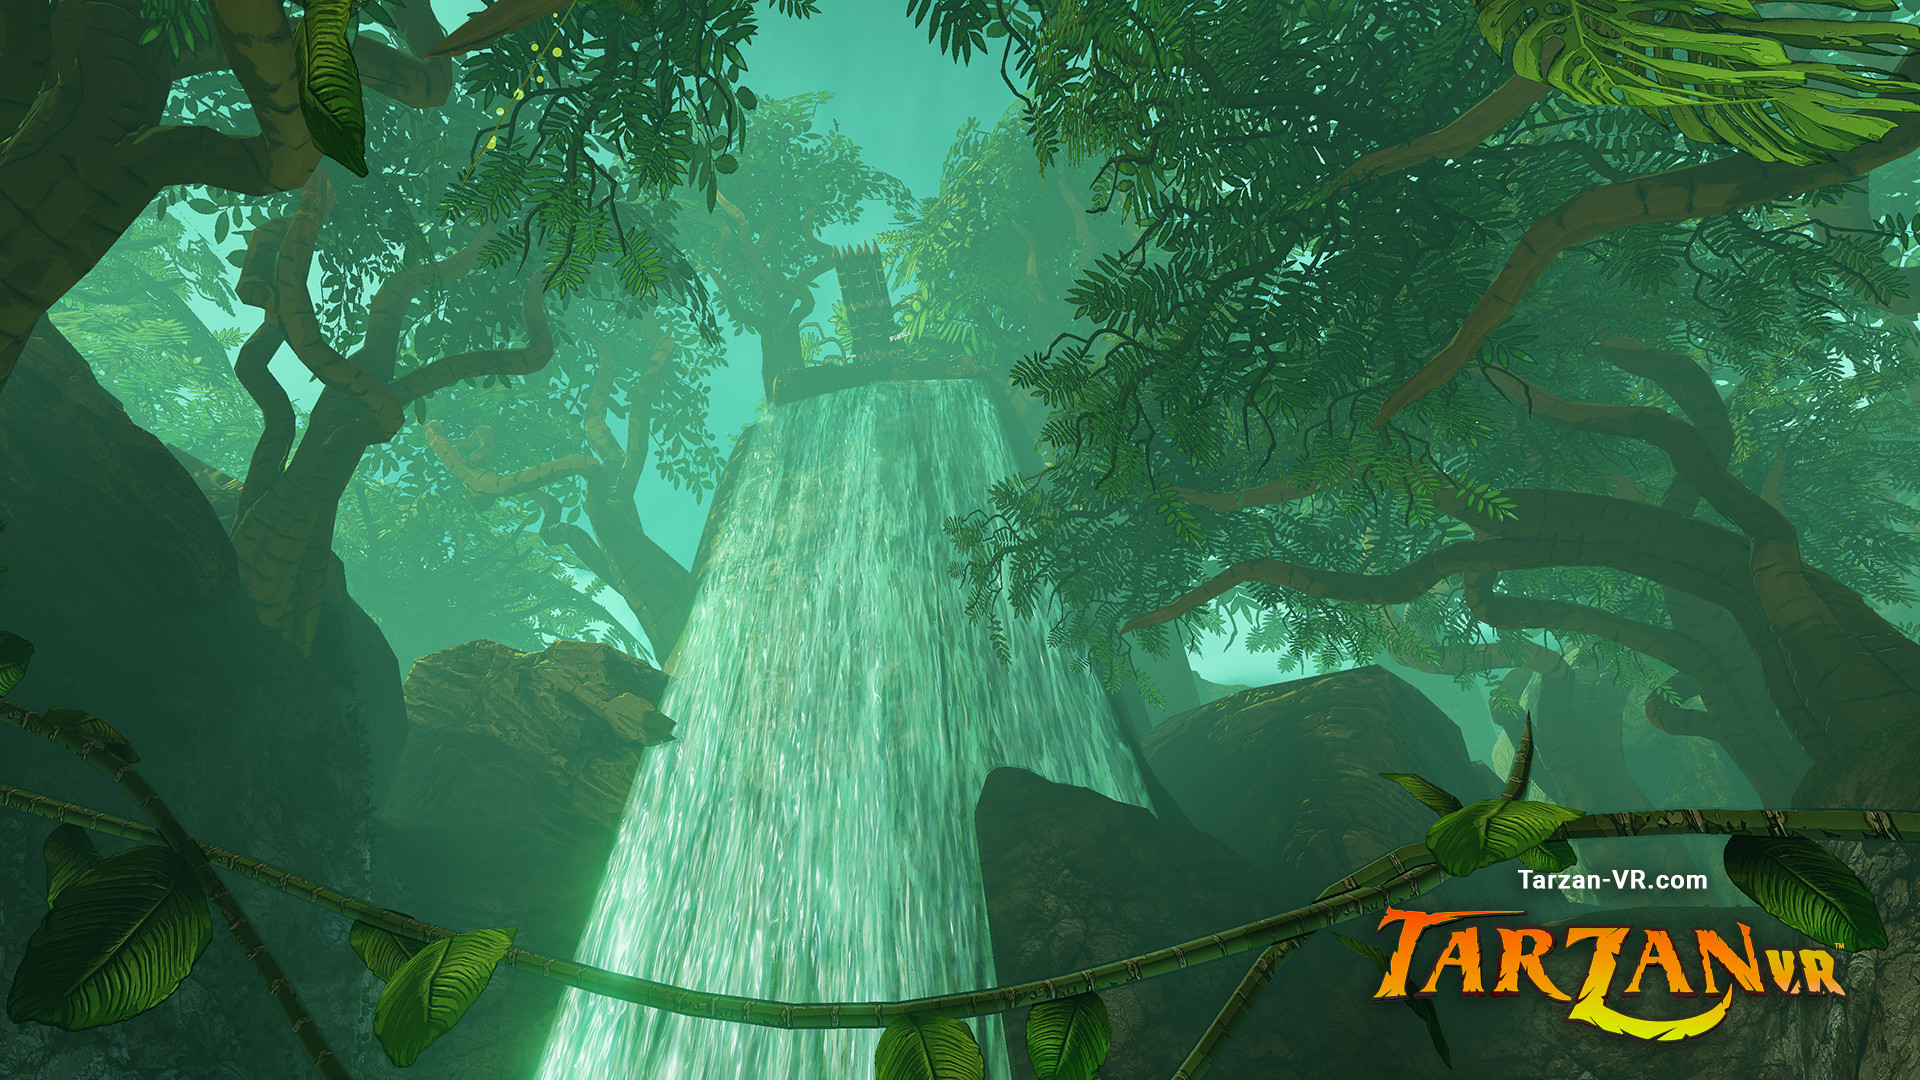 Tarzan VR™  Issue #1 - THE GREAT APE Free Download